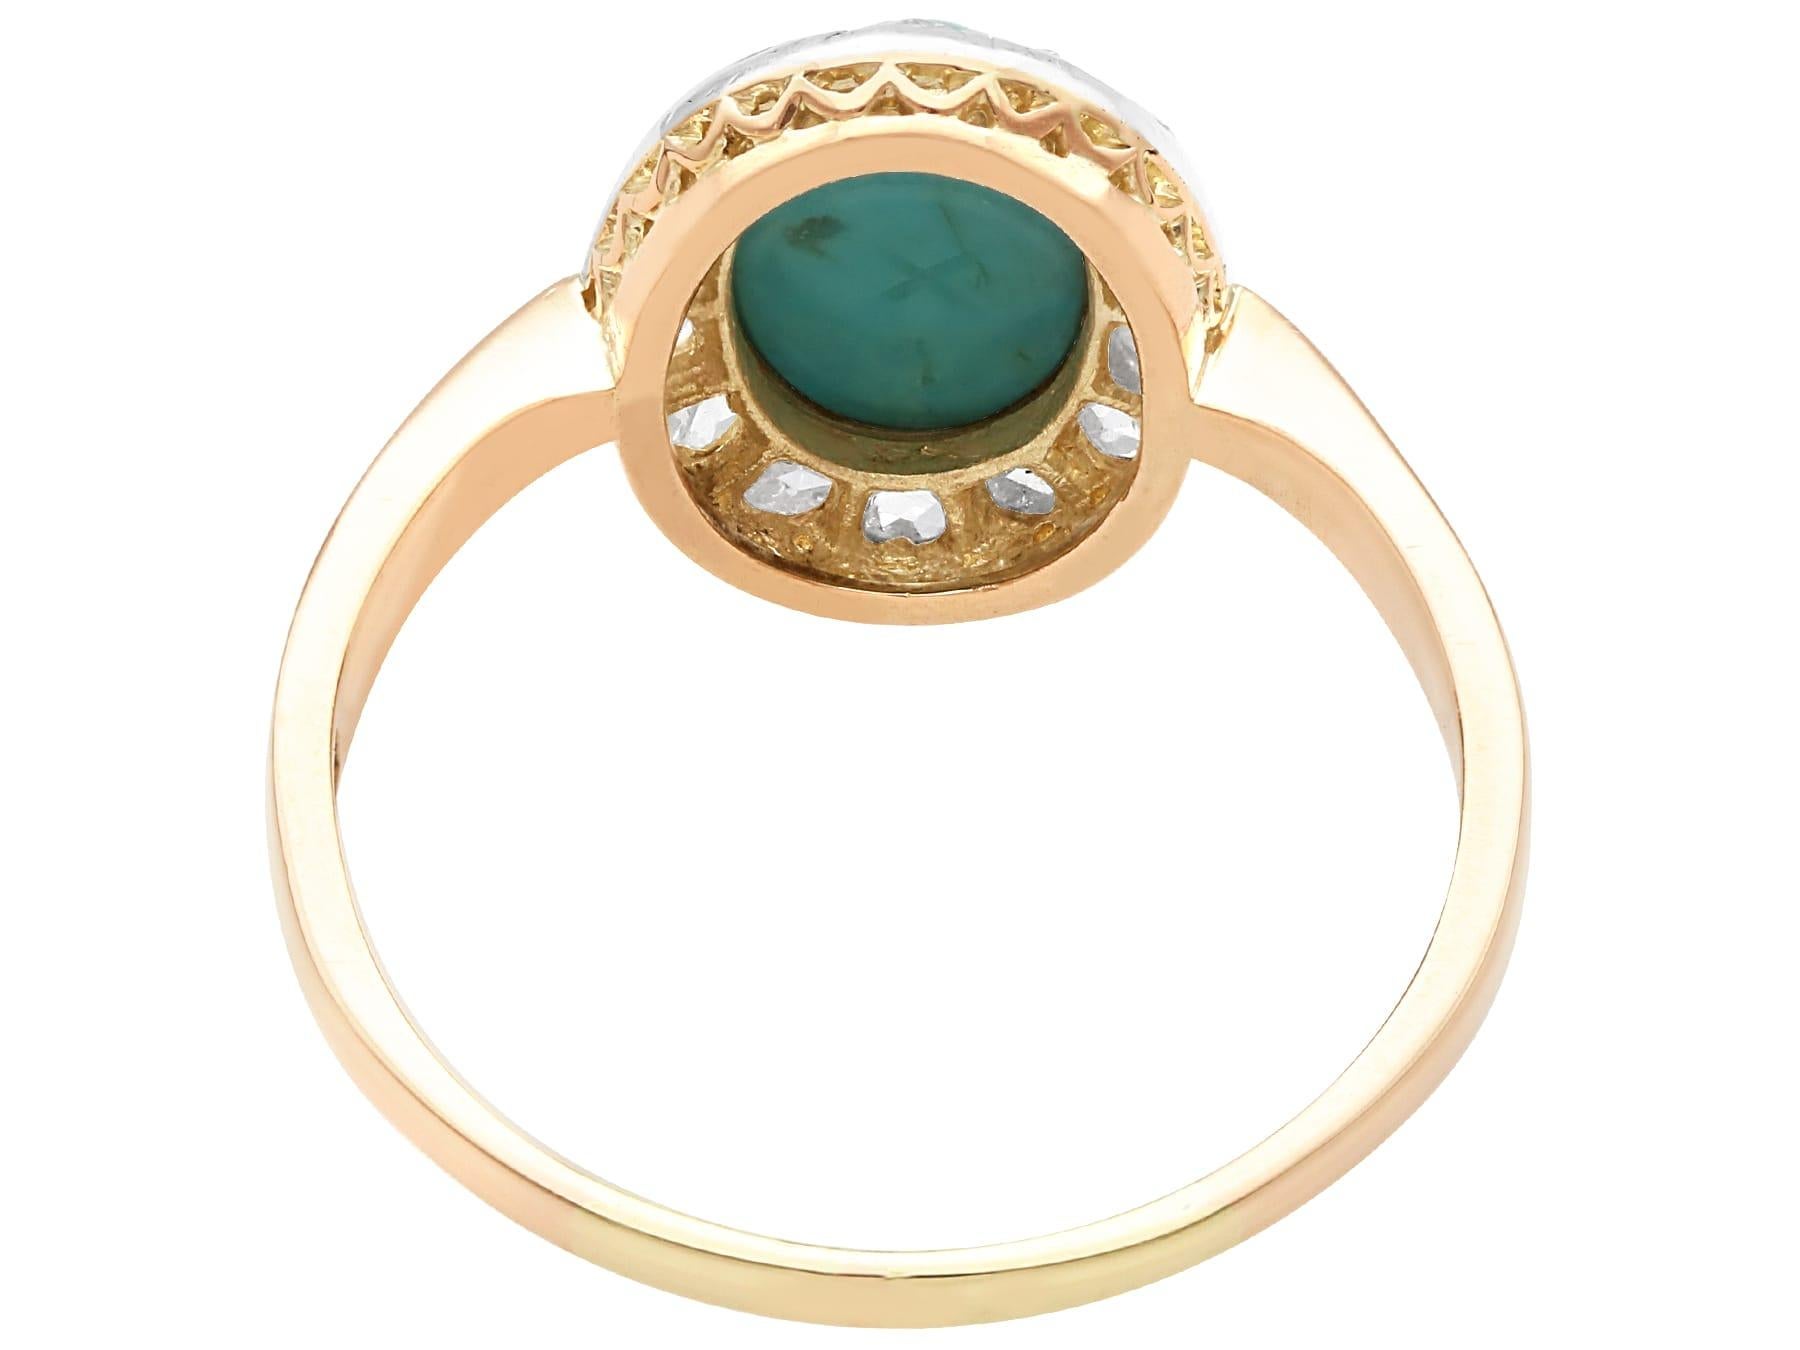 Antique 2.12 Carat Turquoise and 1.32 Carat Diamond 14k Rose Gold Dress Ring In Excellent Condition For Sale In Jesmond, Newcastle Upon Tyne